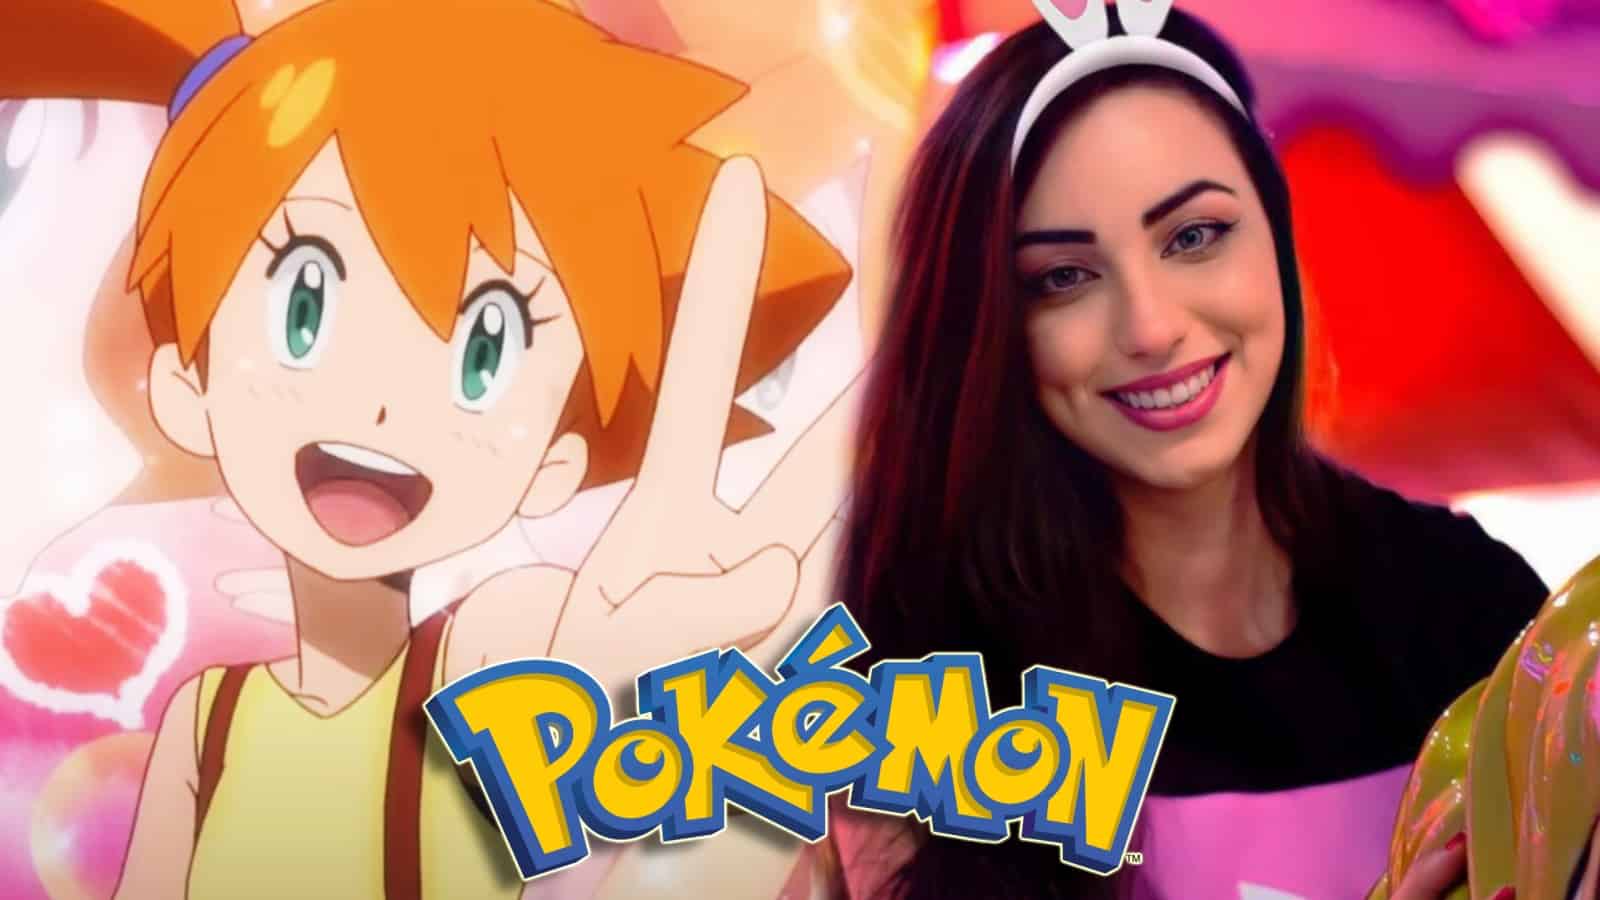 Misty from Pokemon anime next to cosplayer